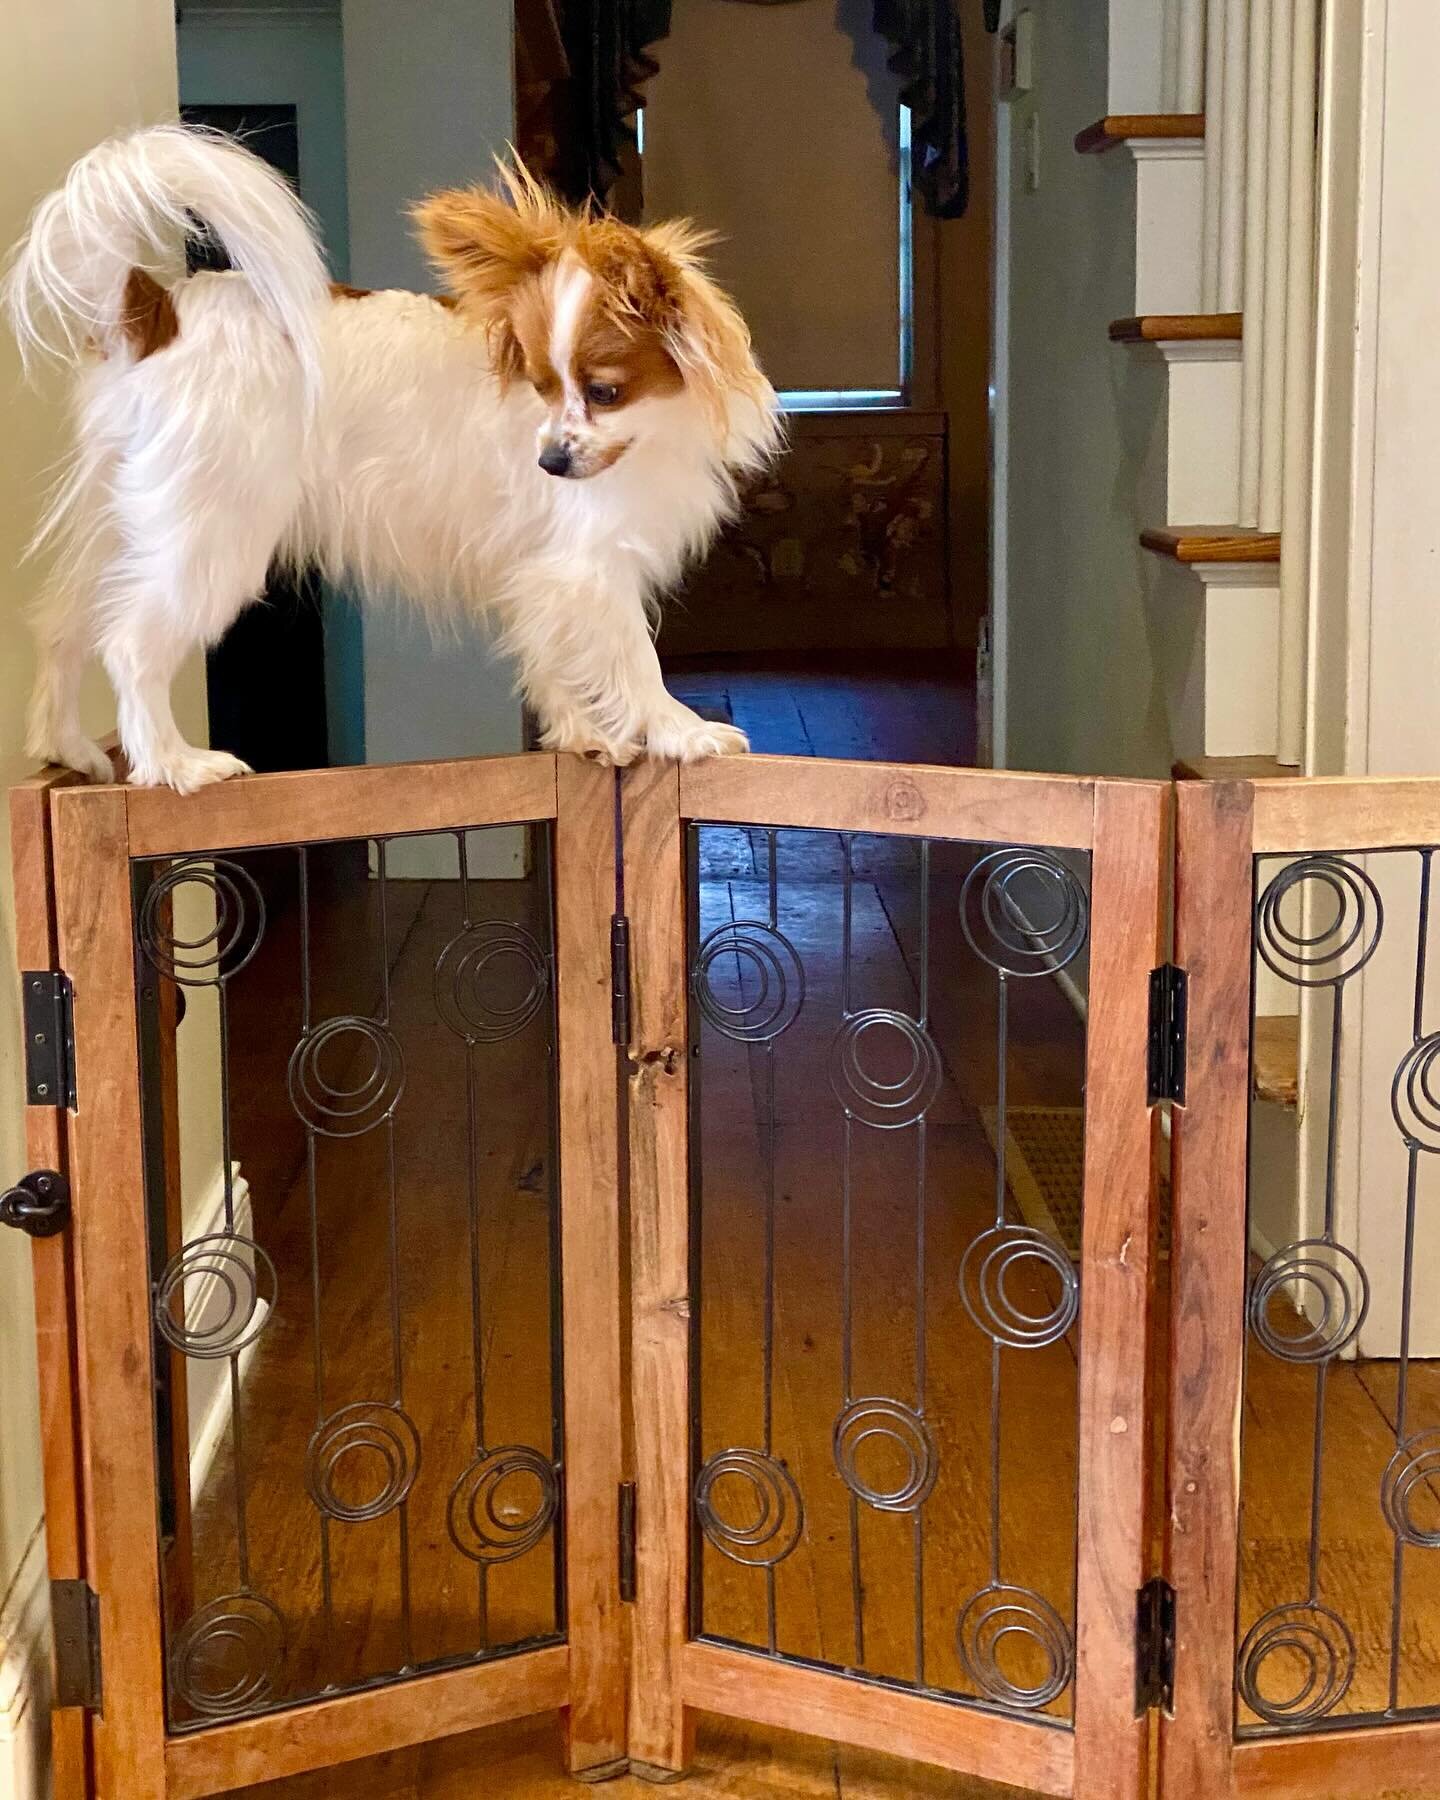 How to effectively use a baby gate&hellip; Owners of my Miko puppies can relate 😎 #papillon #papillons #papillonsofinstagram #papillonlove #papillondog #papillonlife #puppylove #puppies #puppiesofinstagram #puppylife #puppygram #doglife #dogsofinsta